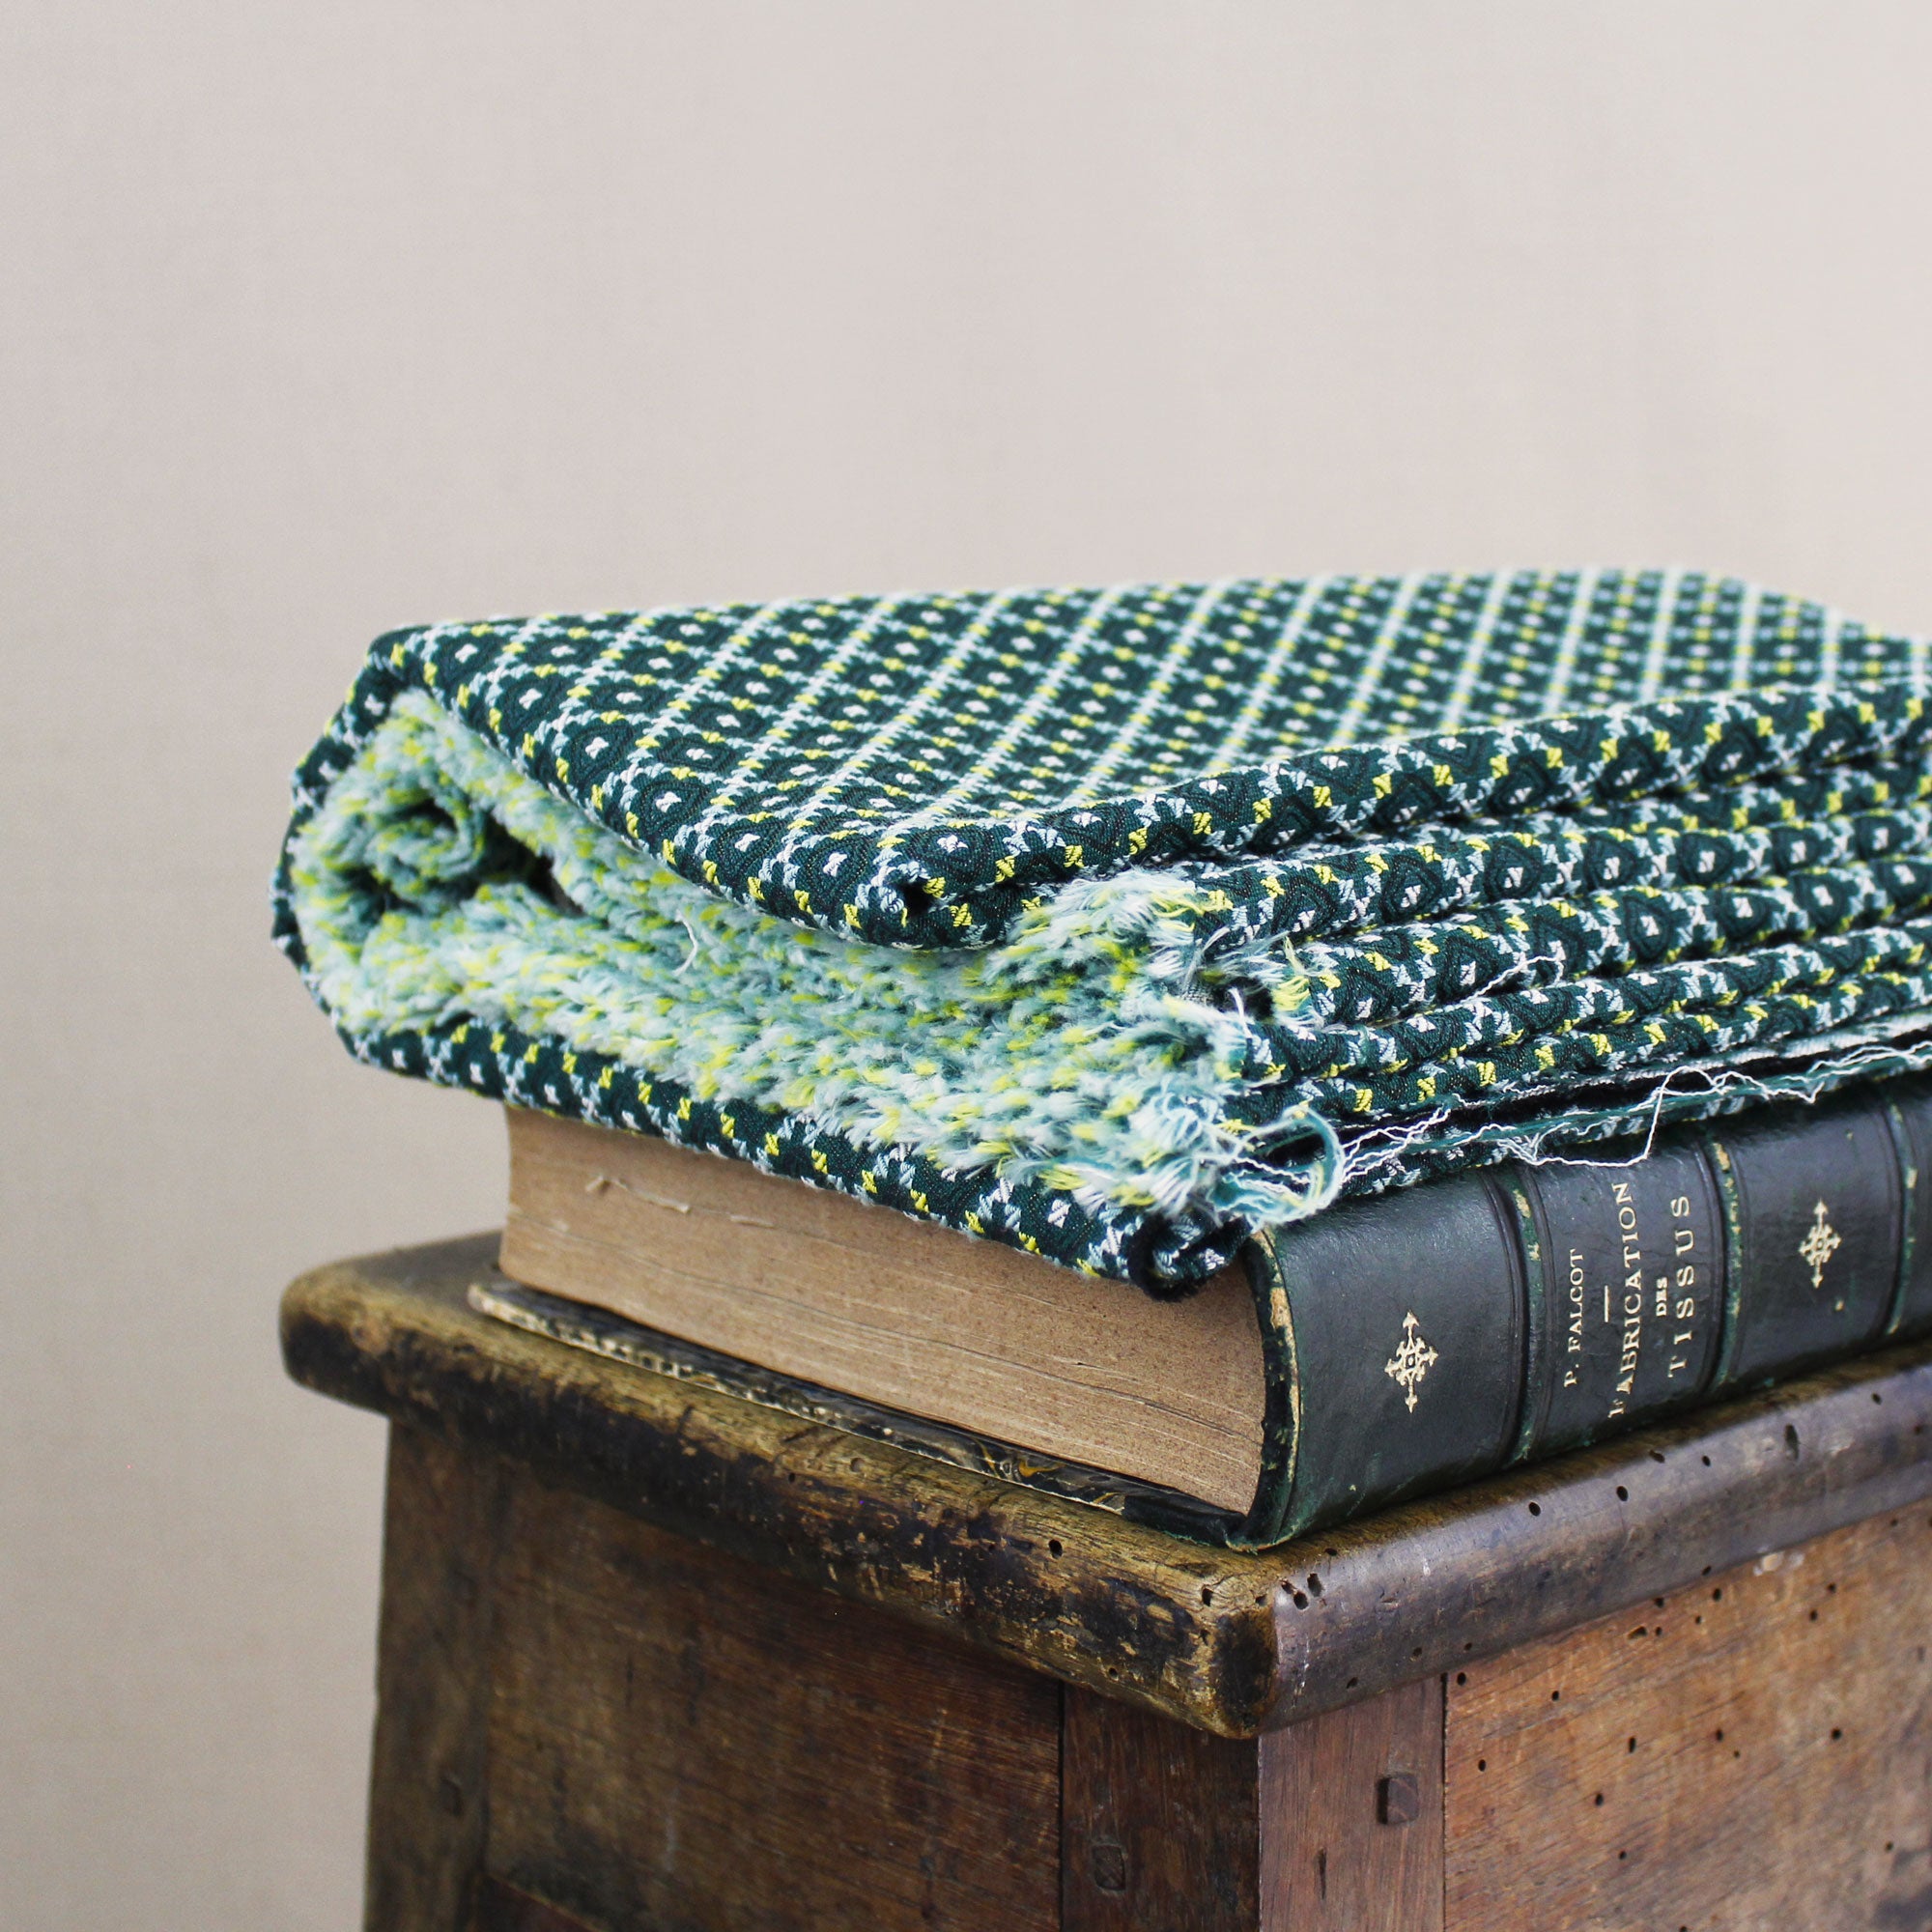 Reversible cotton jacquard fabric with green and yellow graphic patterns